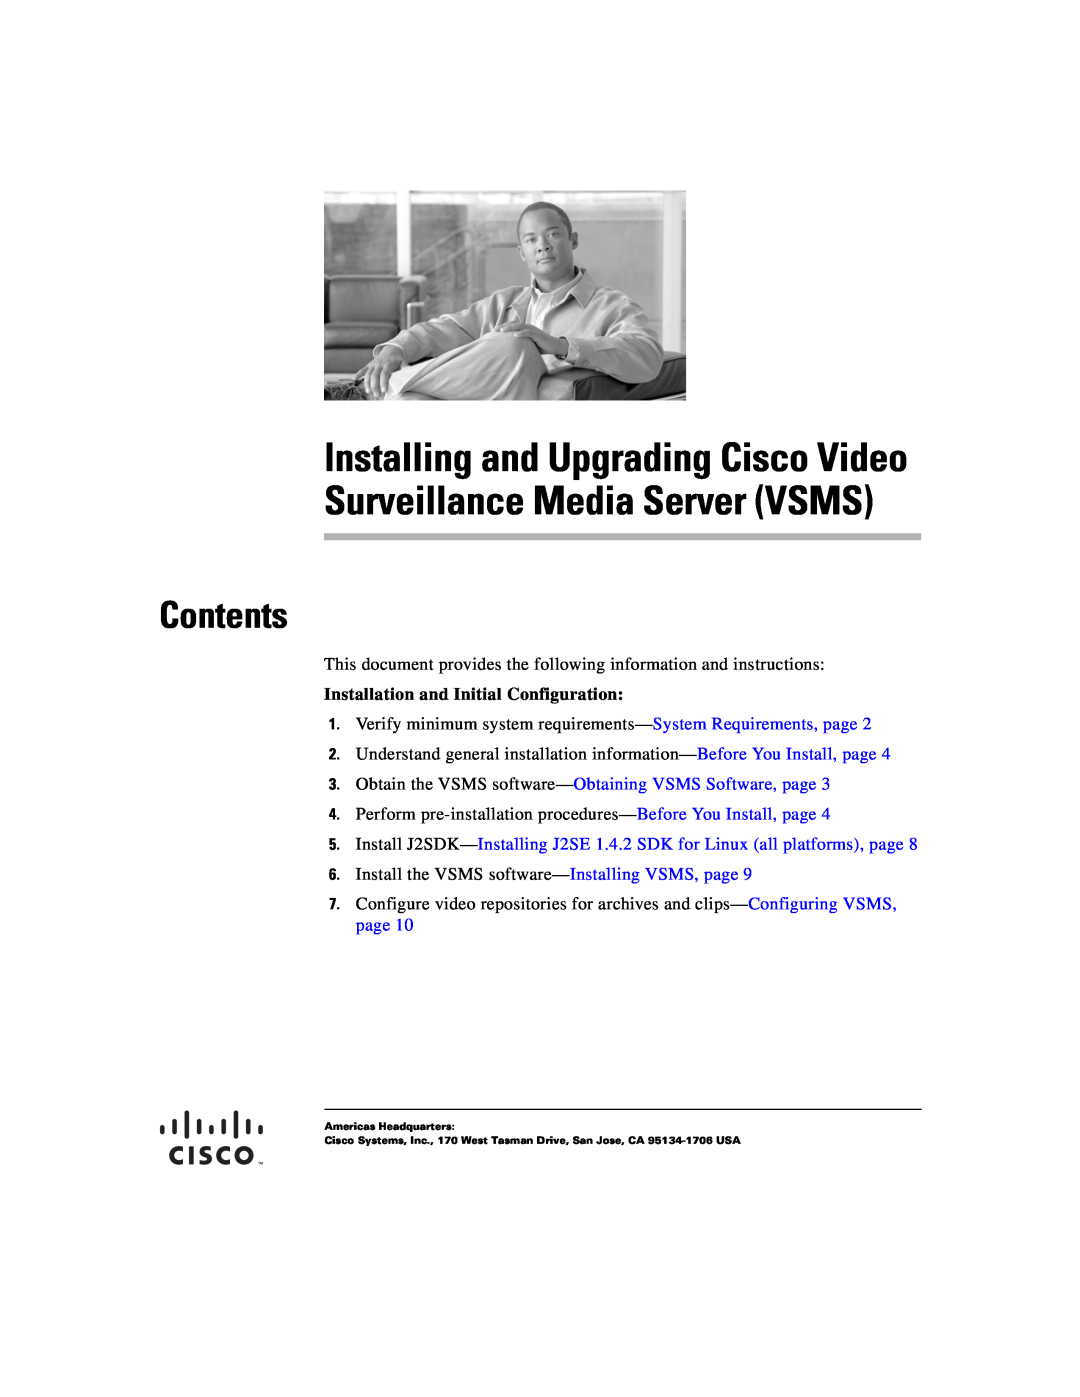 Cisco Systems Surveillance Media Server manual Contents, Installation and Initial Configuration 